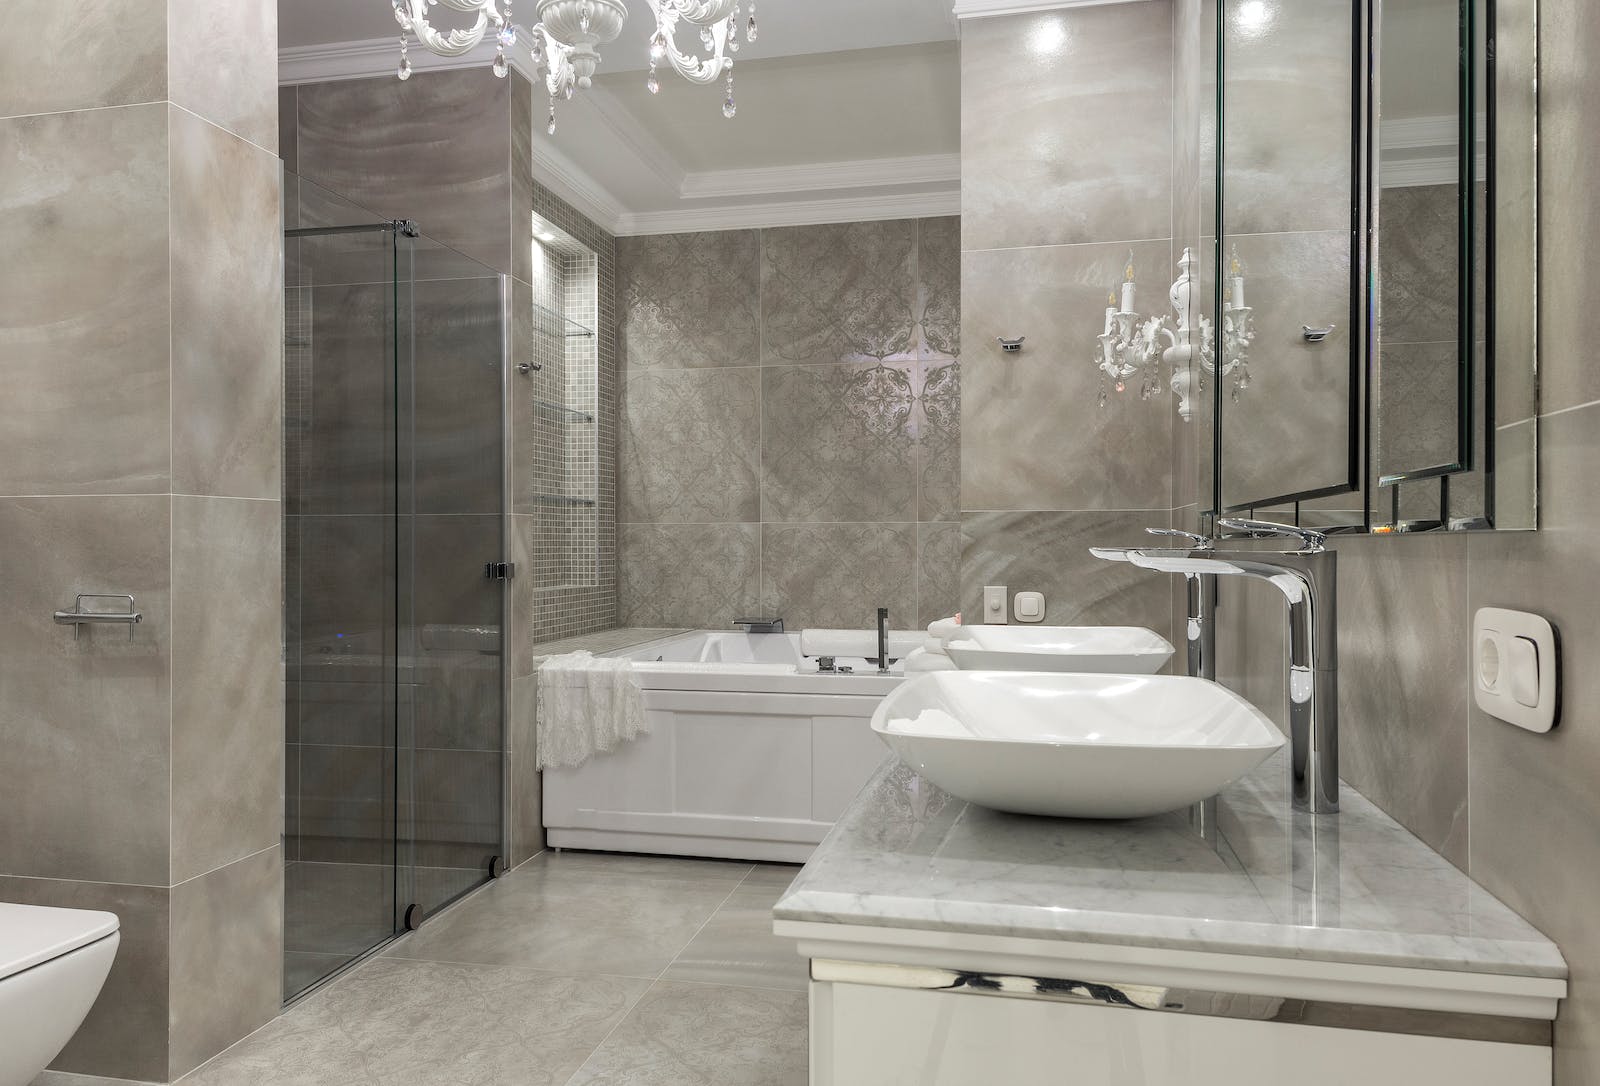 What Does a Bathroom Remodel Cost You?